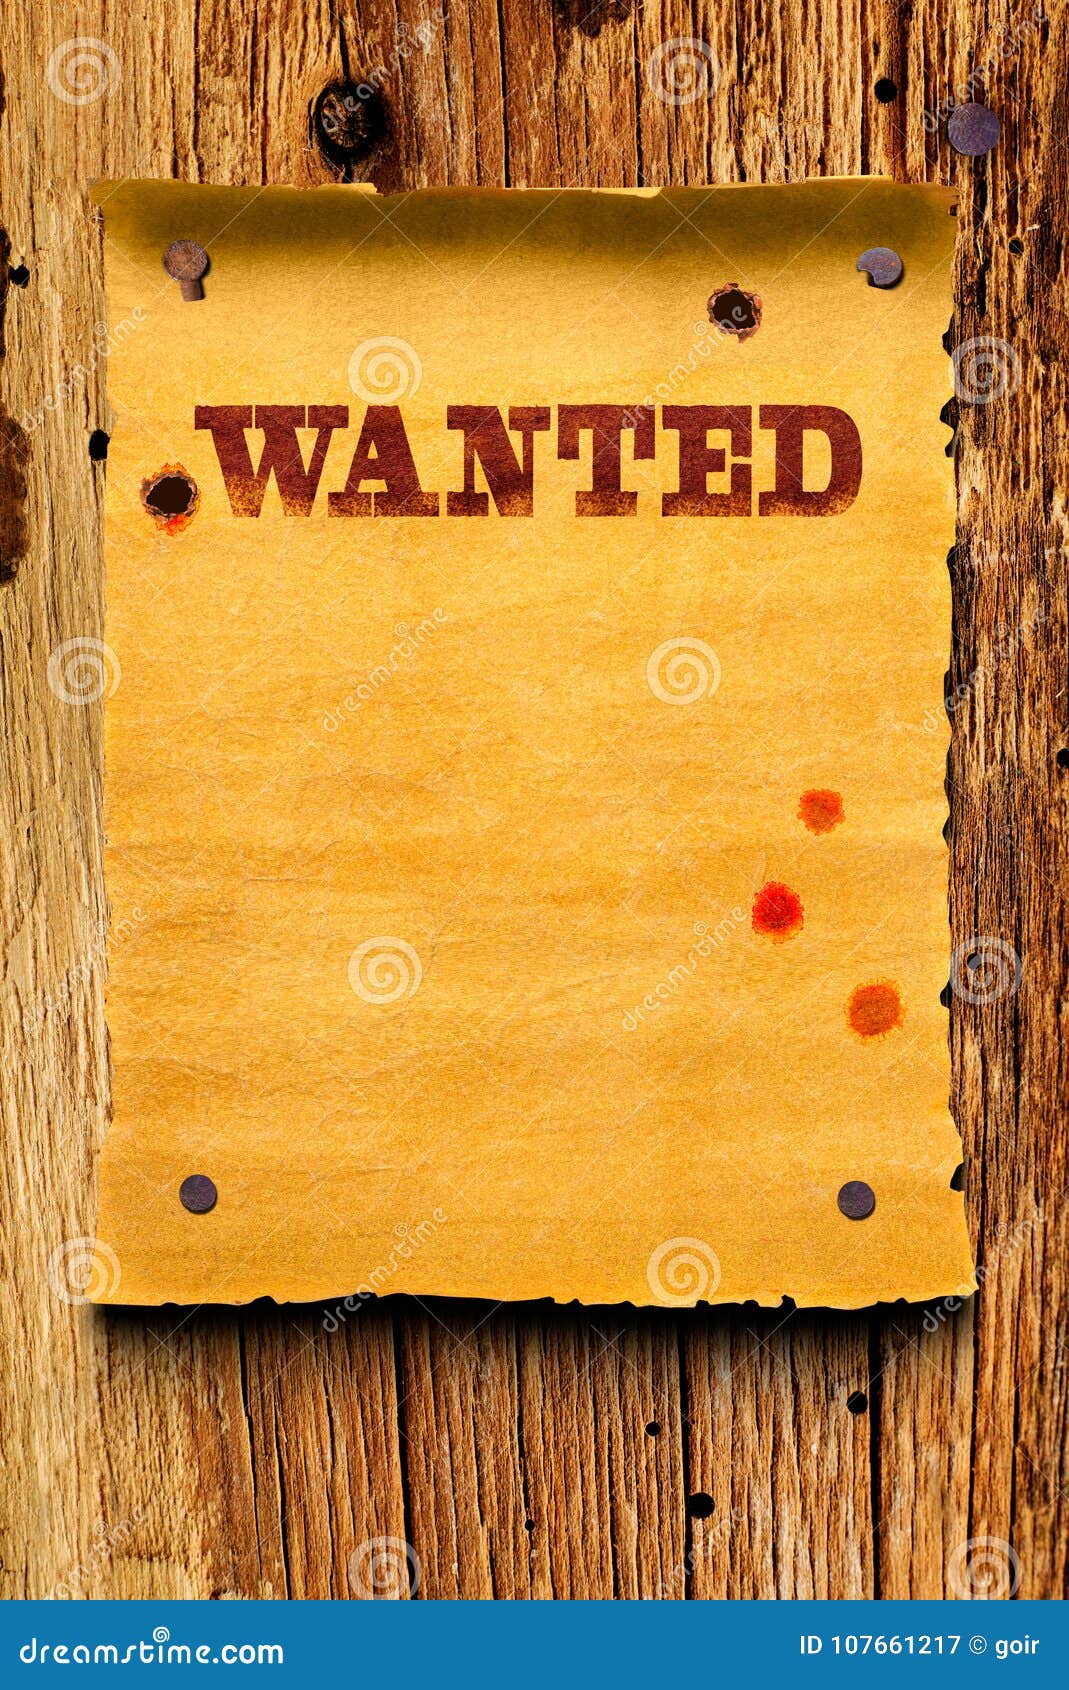 Wanted poster background stock image. Image of effect - 107661217